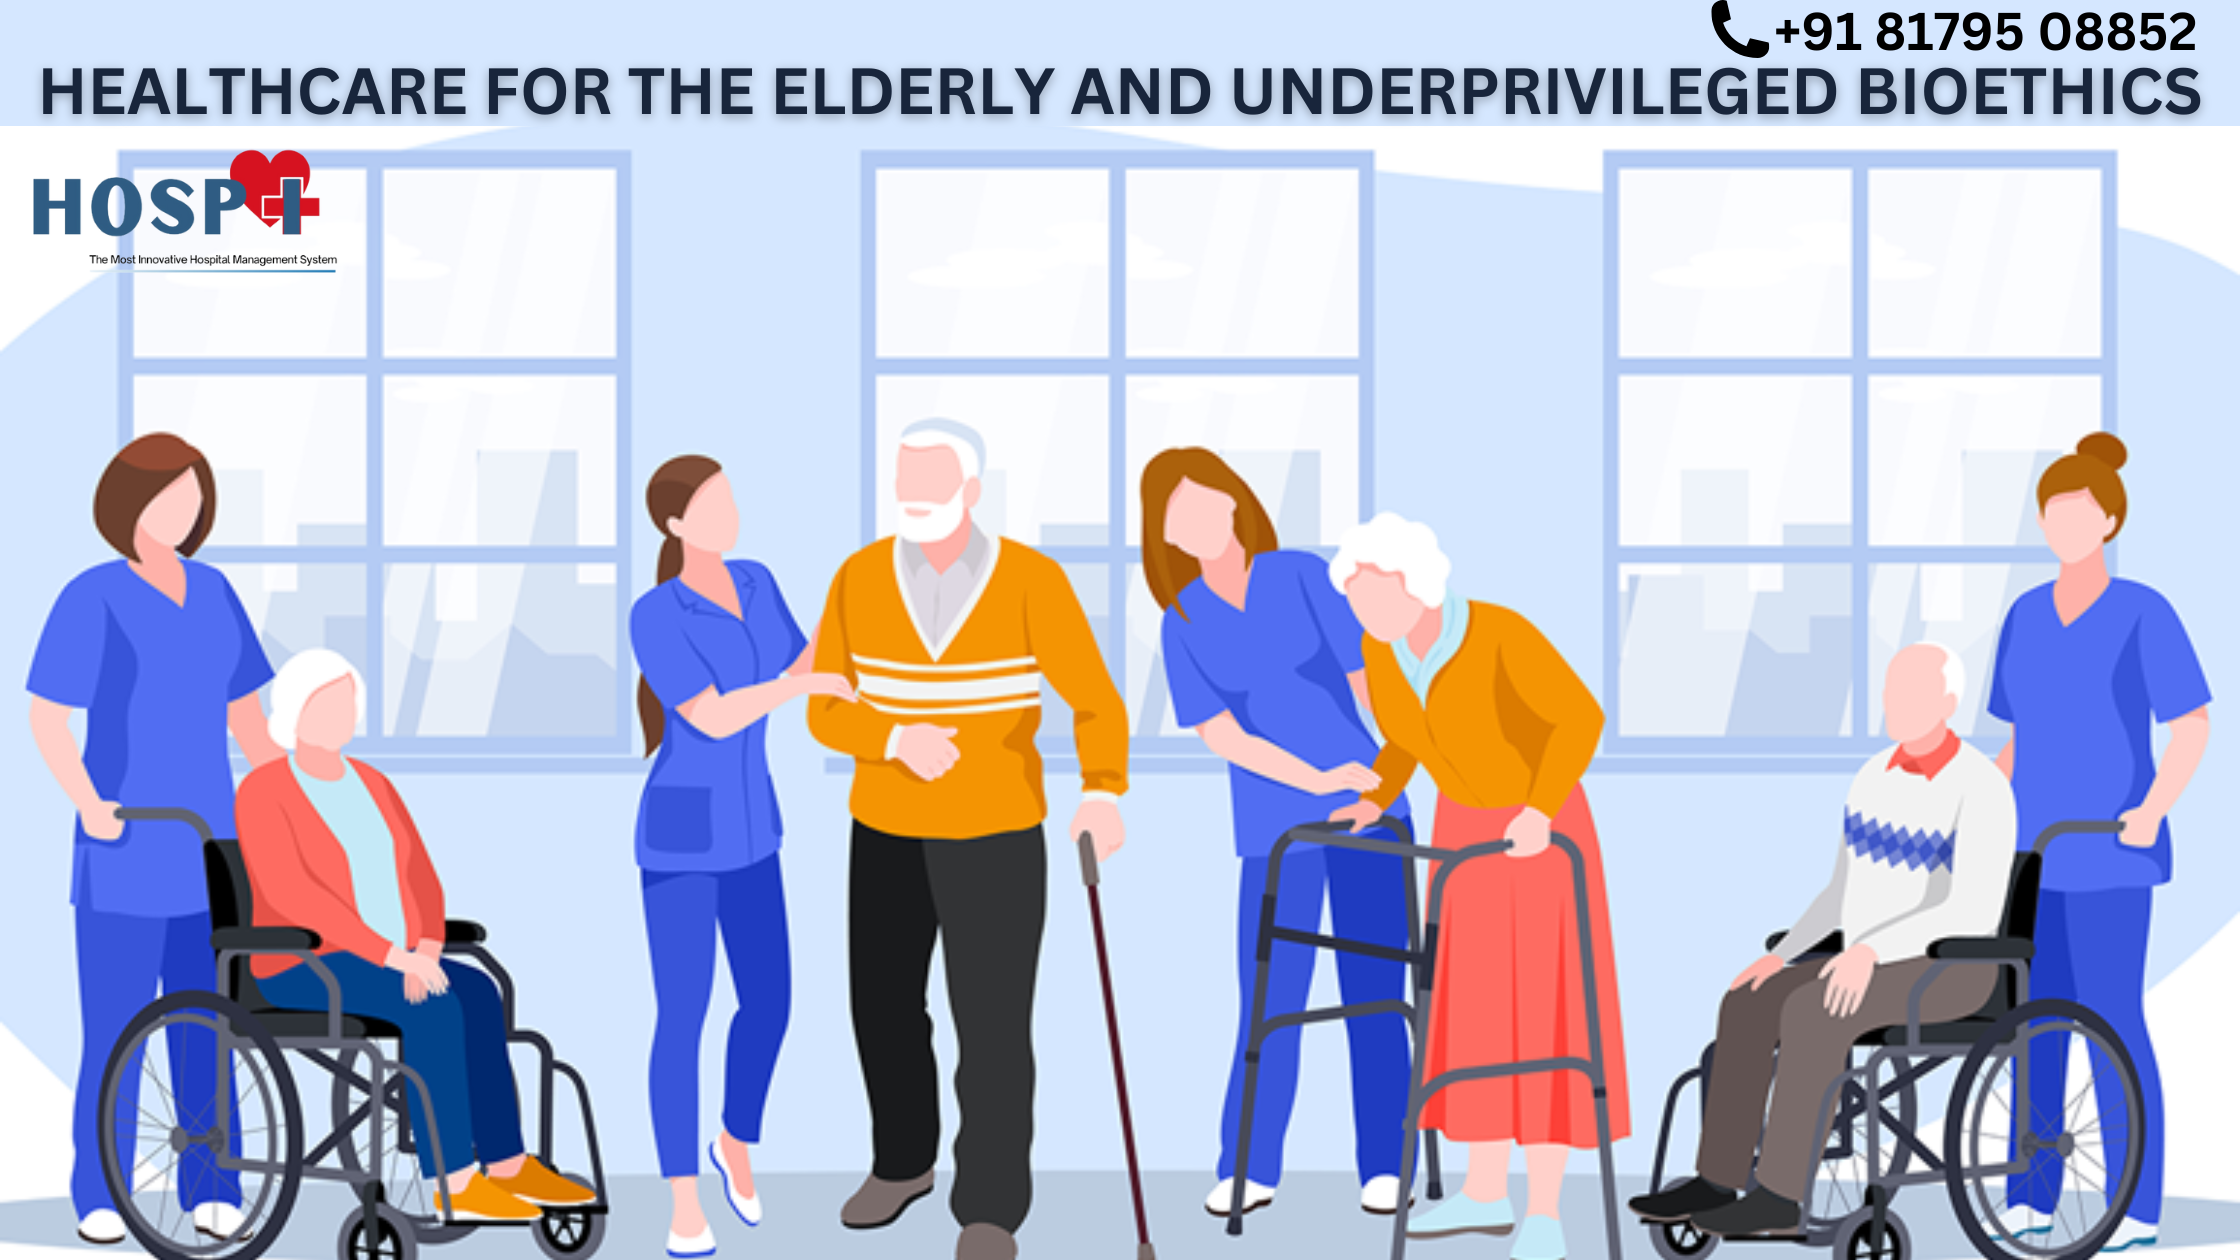 Healthcare for the elderly and underprivileged bioethics